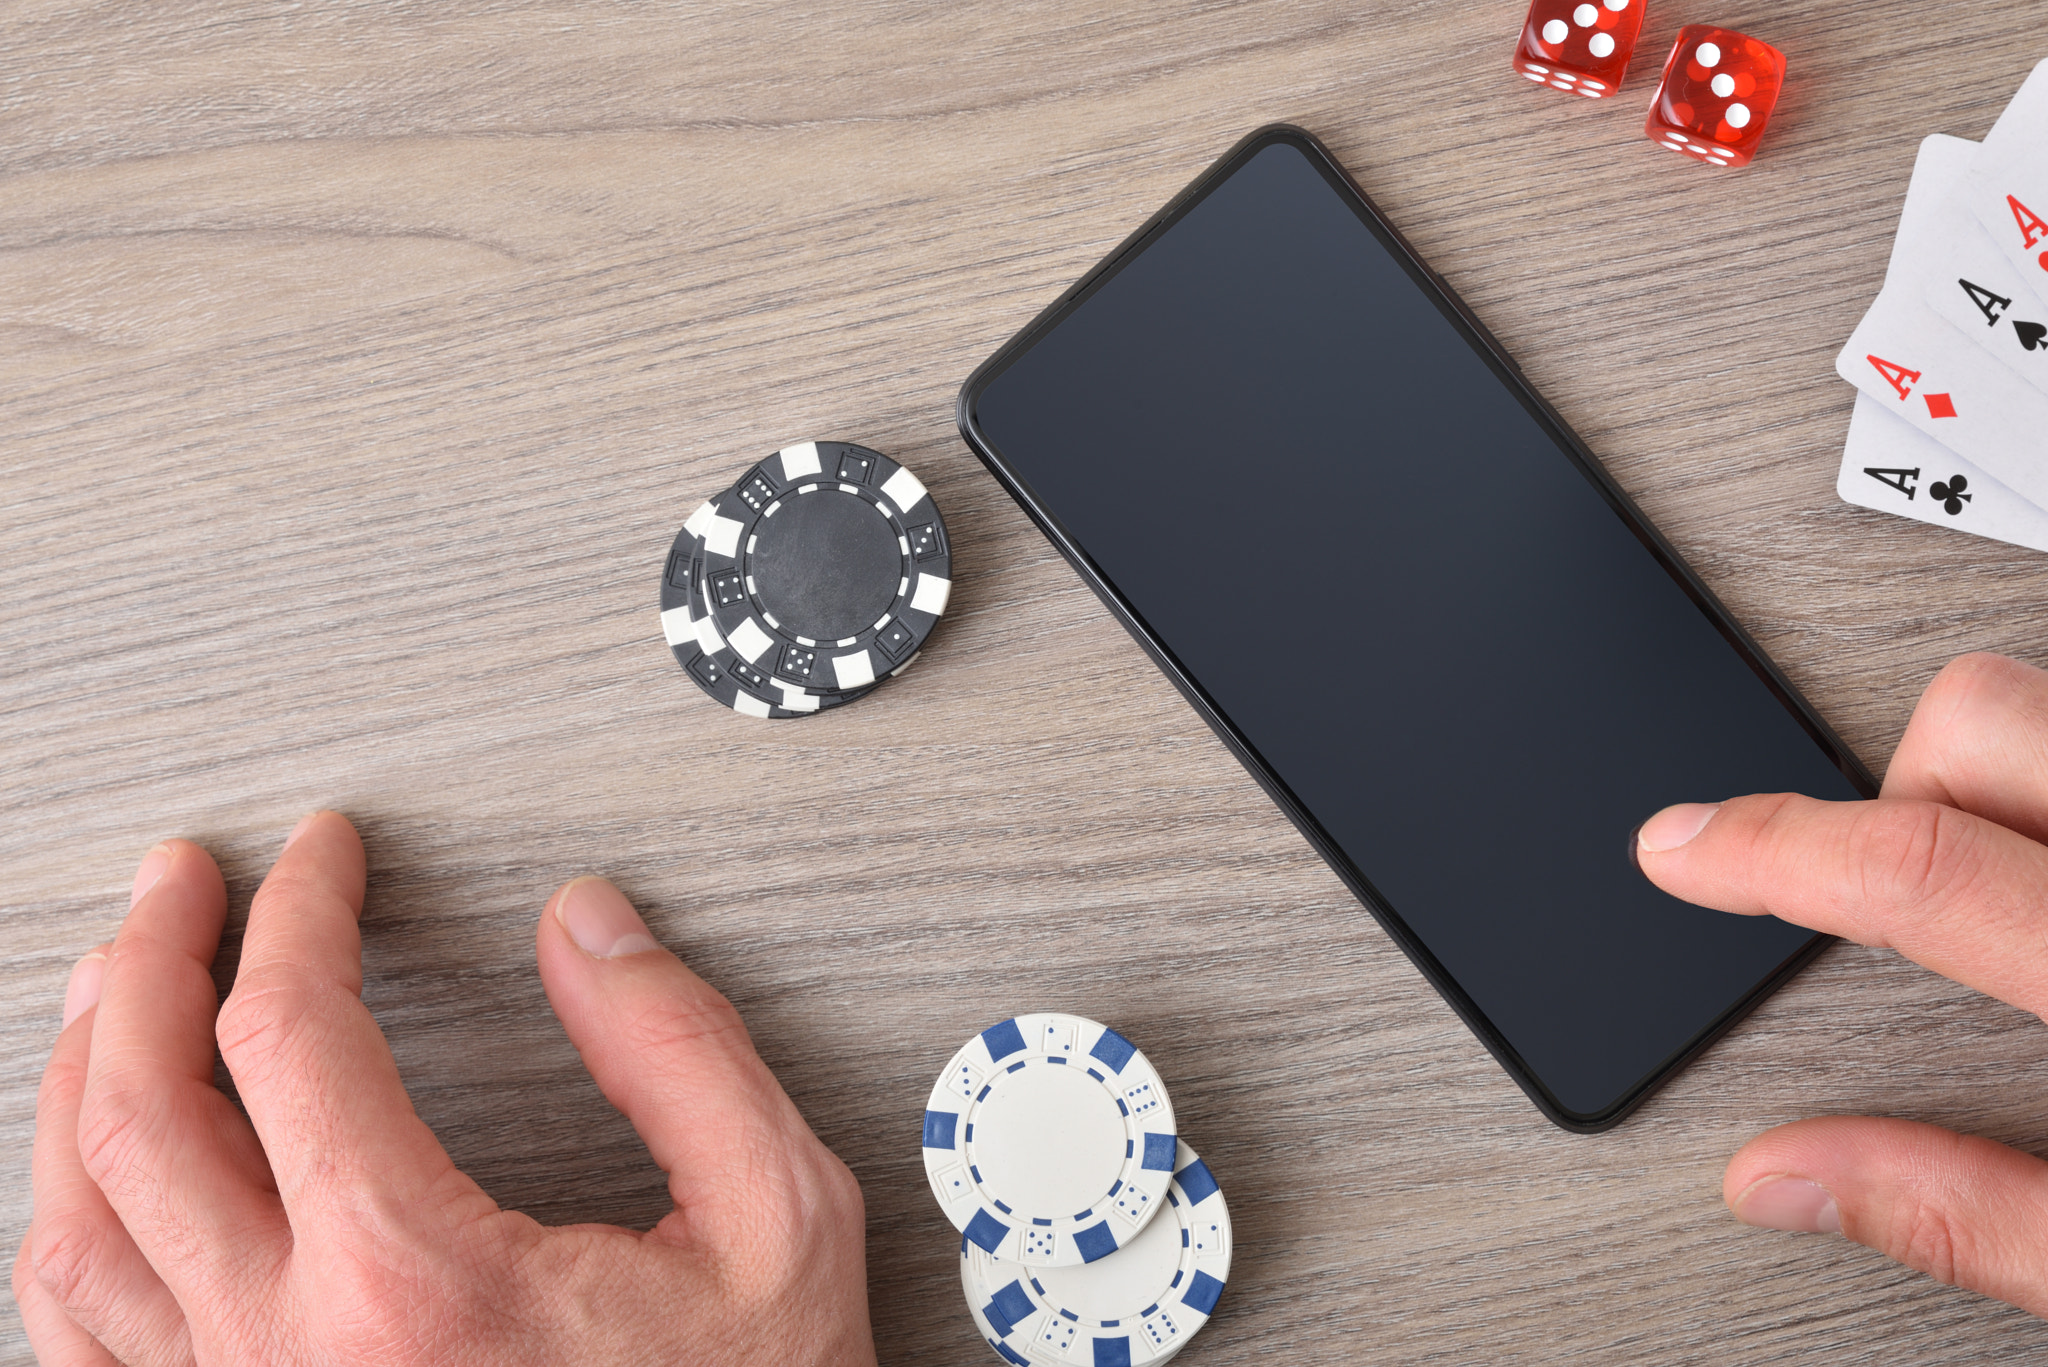 Online gambling concept with hand using smartphone and game pieces